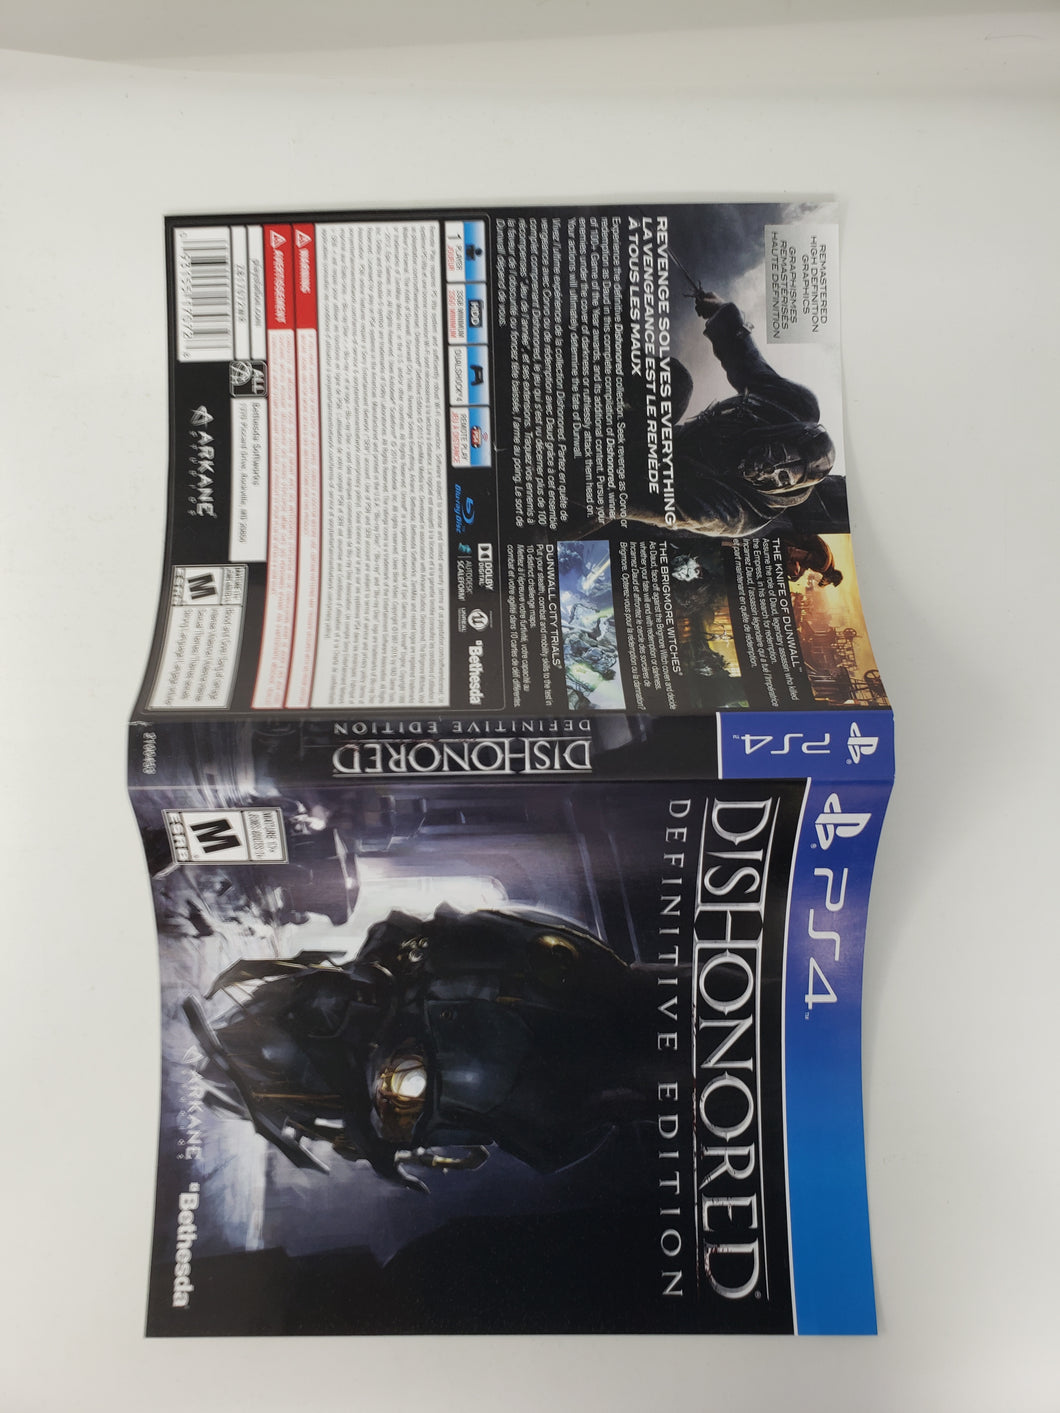 Dishonored [Definitive Edition] [Couverture] - Sony Playstation 4 | PS4